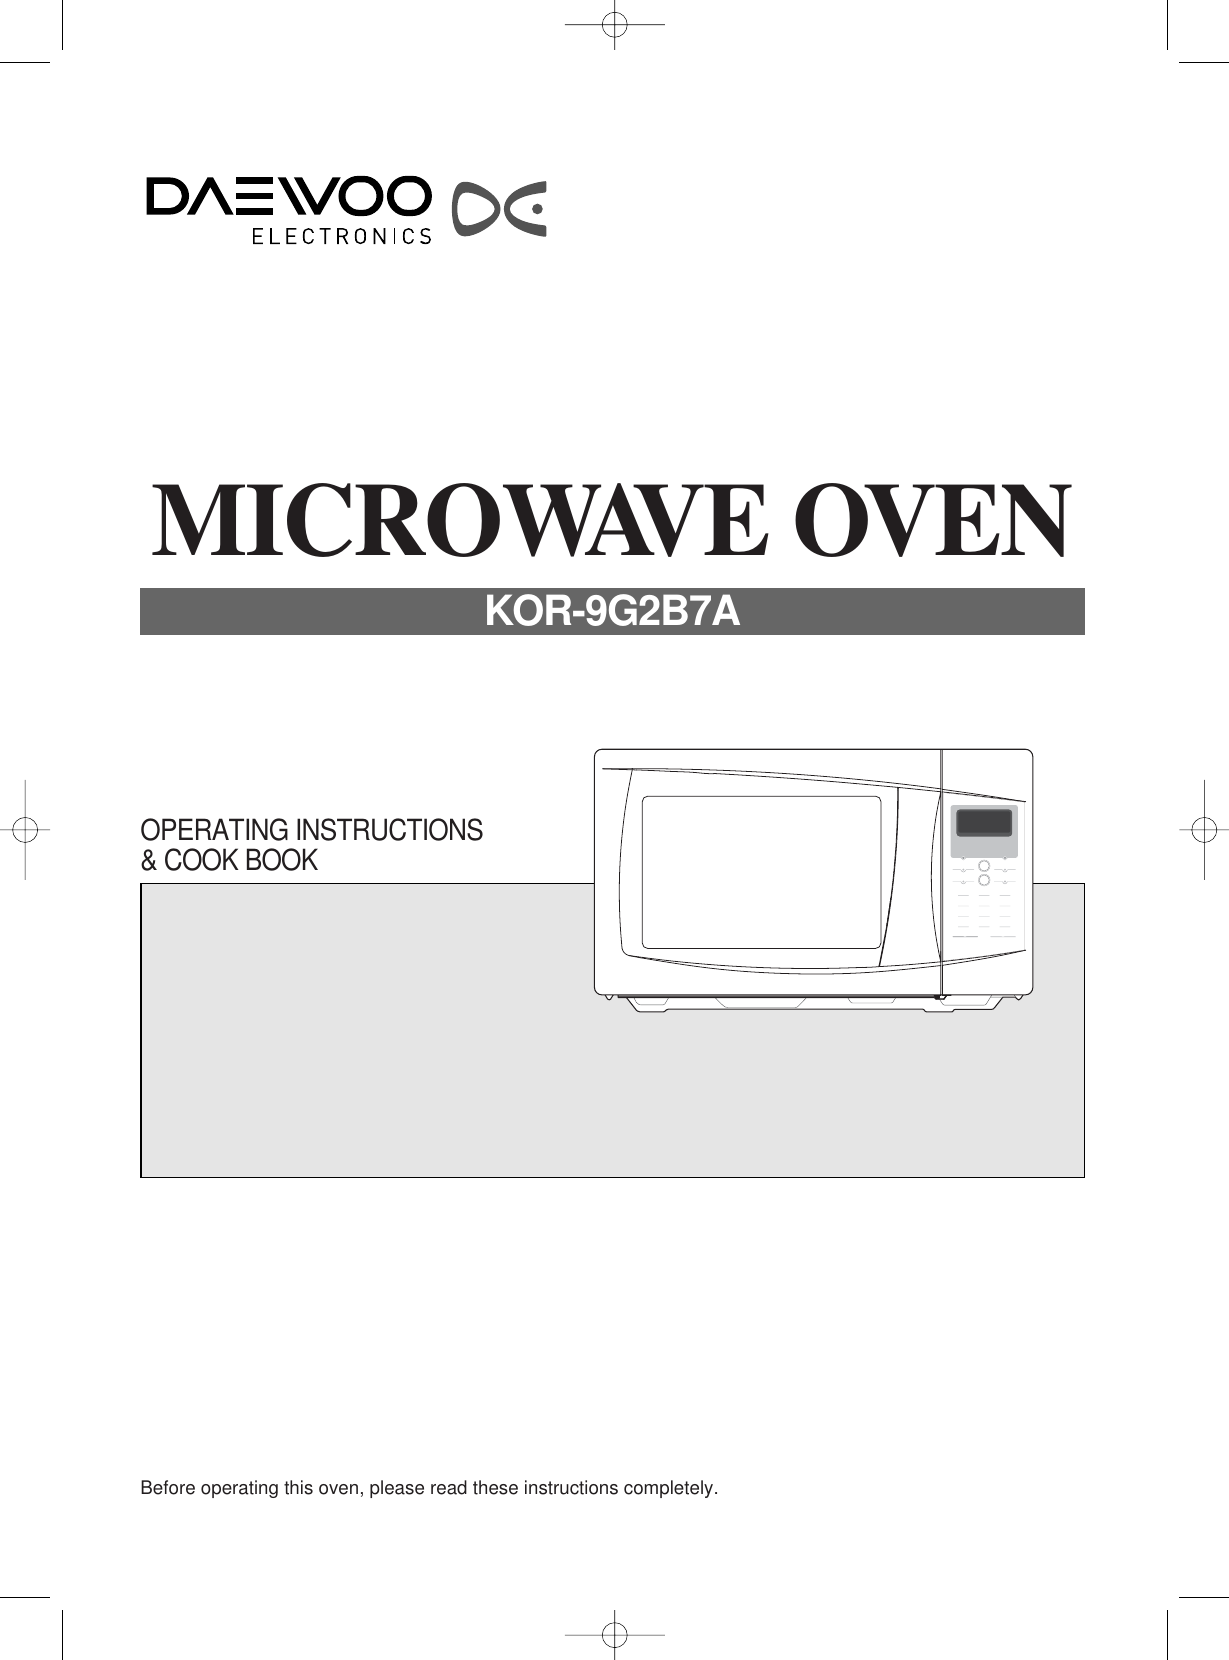 Before operating this oven, please read these instructions completely.OPERATING INSTRUCTIONS&amp; COOK BOOKMICROWAVE OVENKOR-9G2B7A